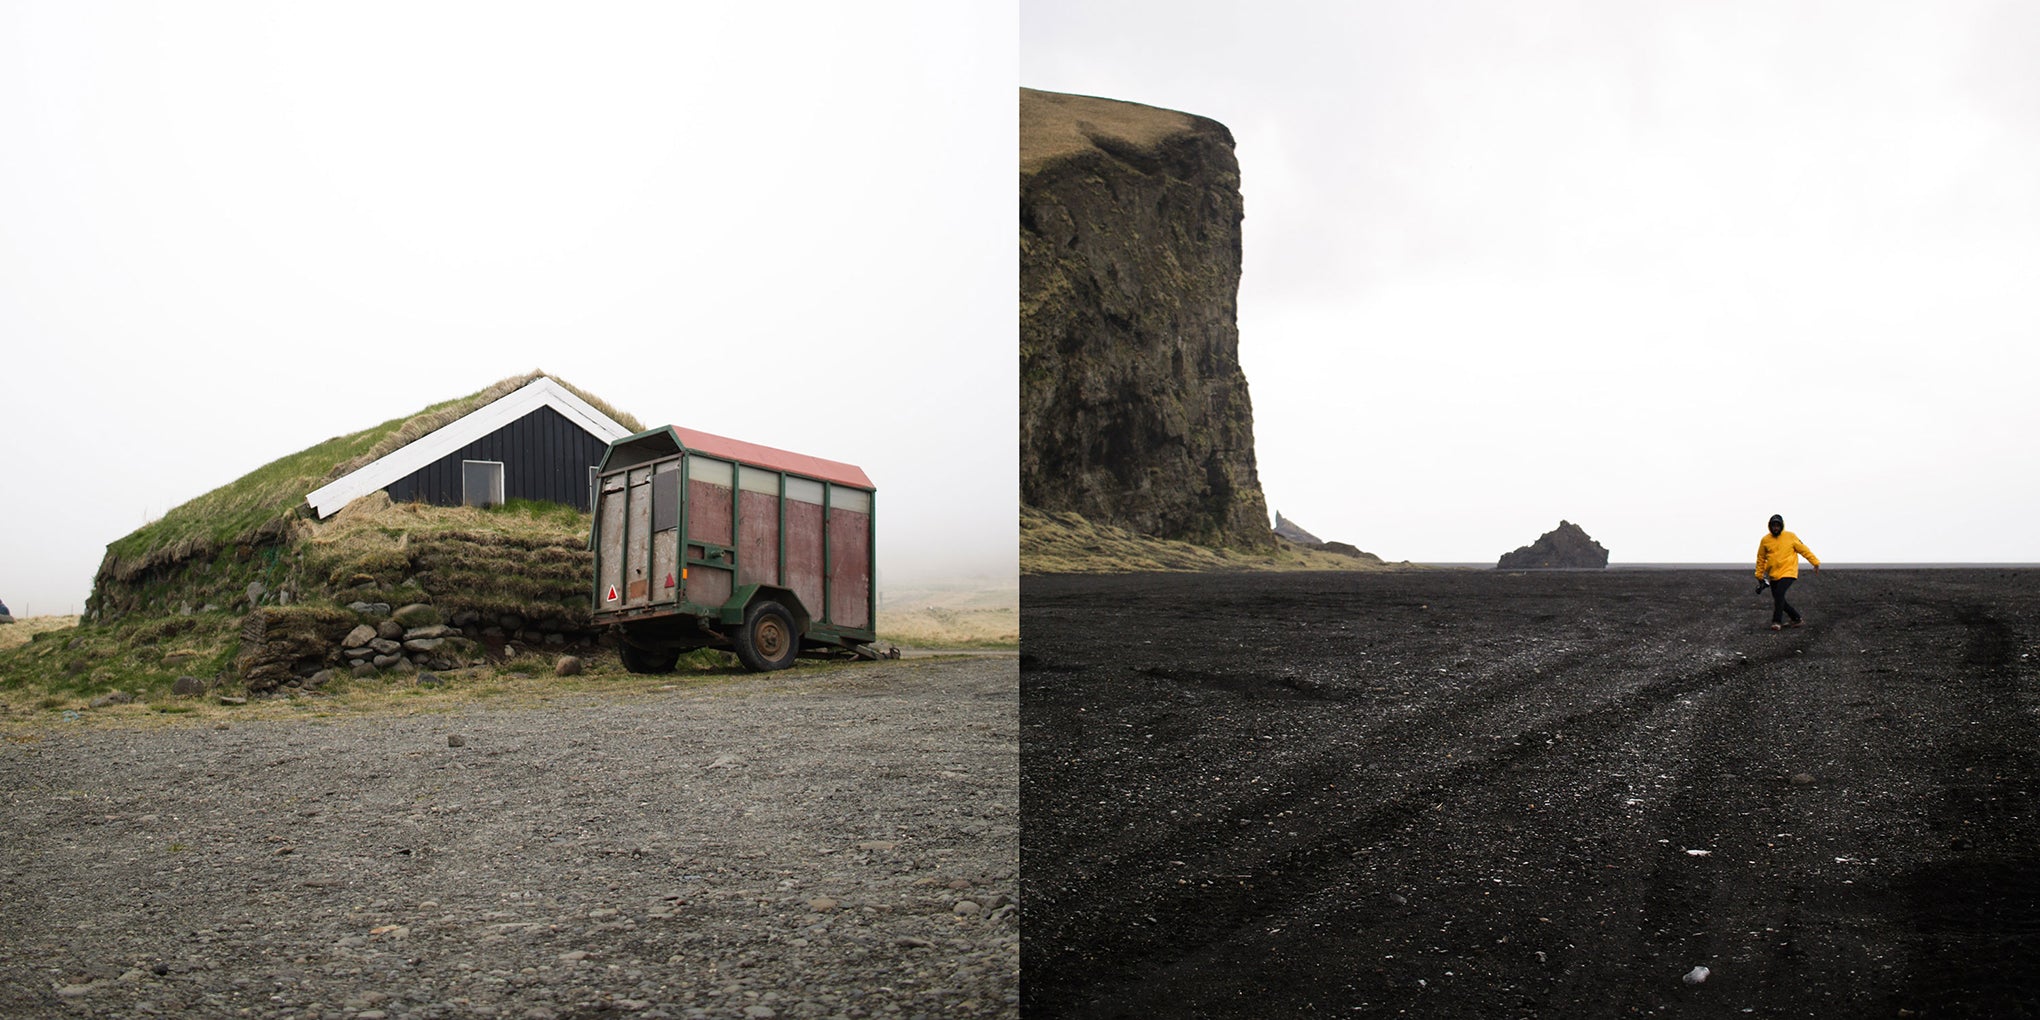 Bather Excellent Adventures in Iceland shot by Tommy Moore